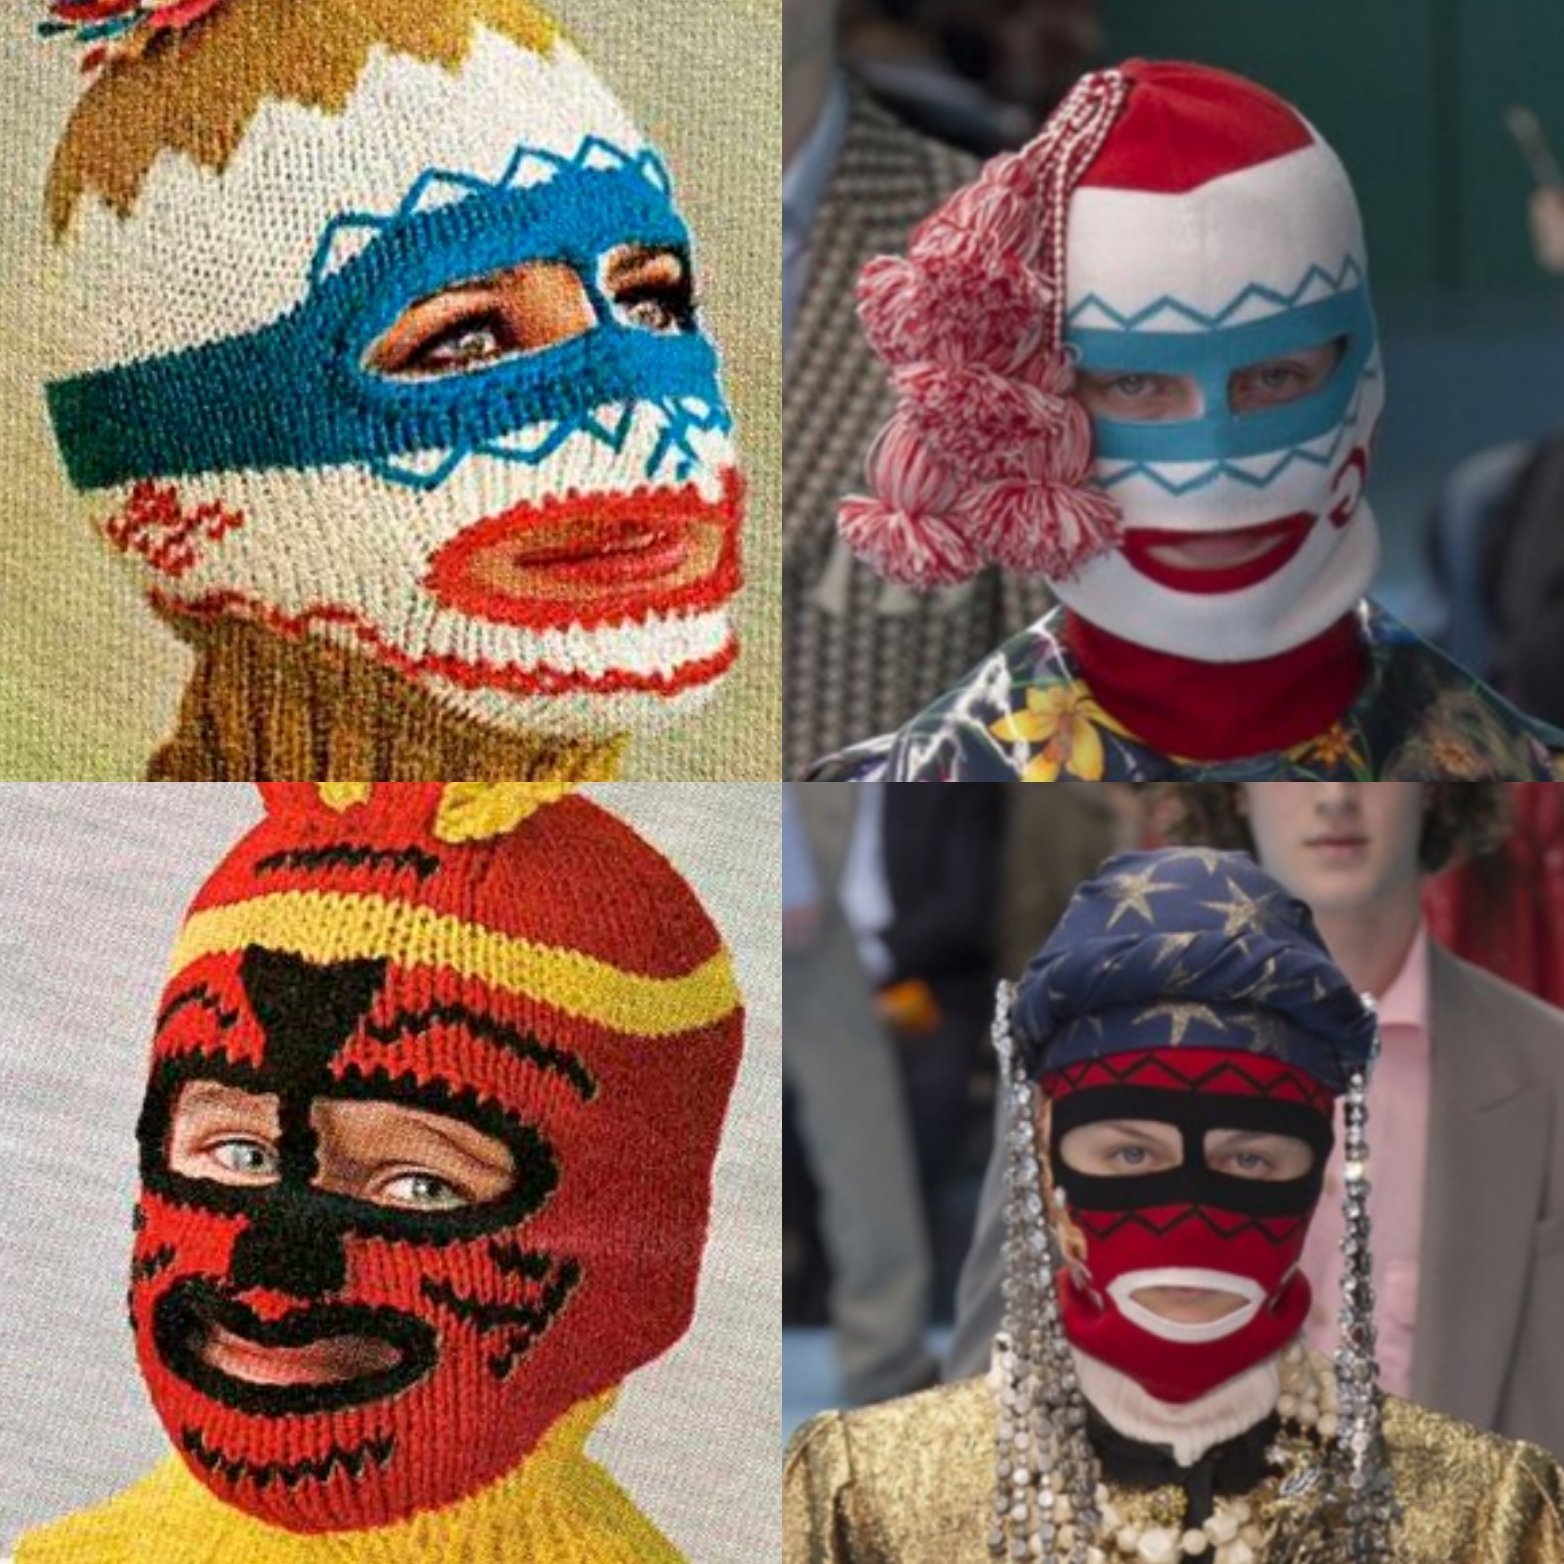 Outi (Les) Pyy Vastuullisuusvaikuttaja on X: When designers are too  literately inspired. On the left are ski mask knitting patterns from late  70s and on the right Gucci Fall 2018 balaclava masks.